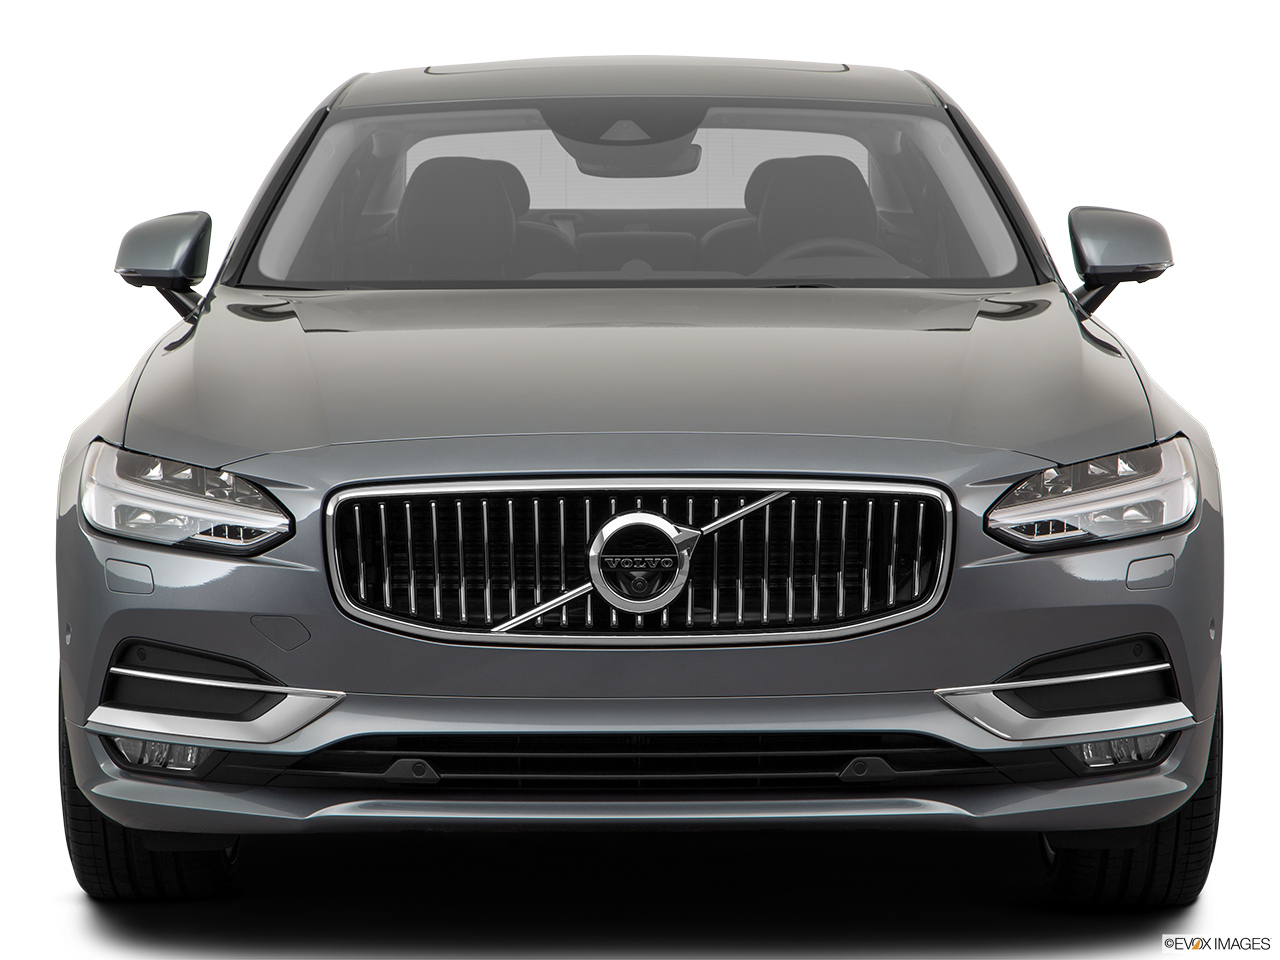 2017 Volvo S90 T6 Inscription Low/wide front. 